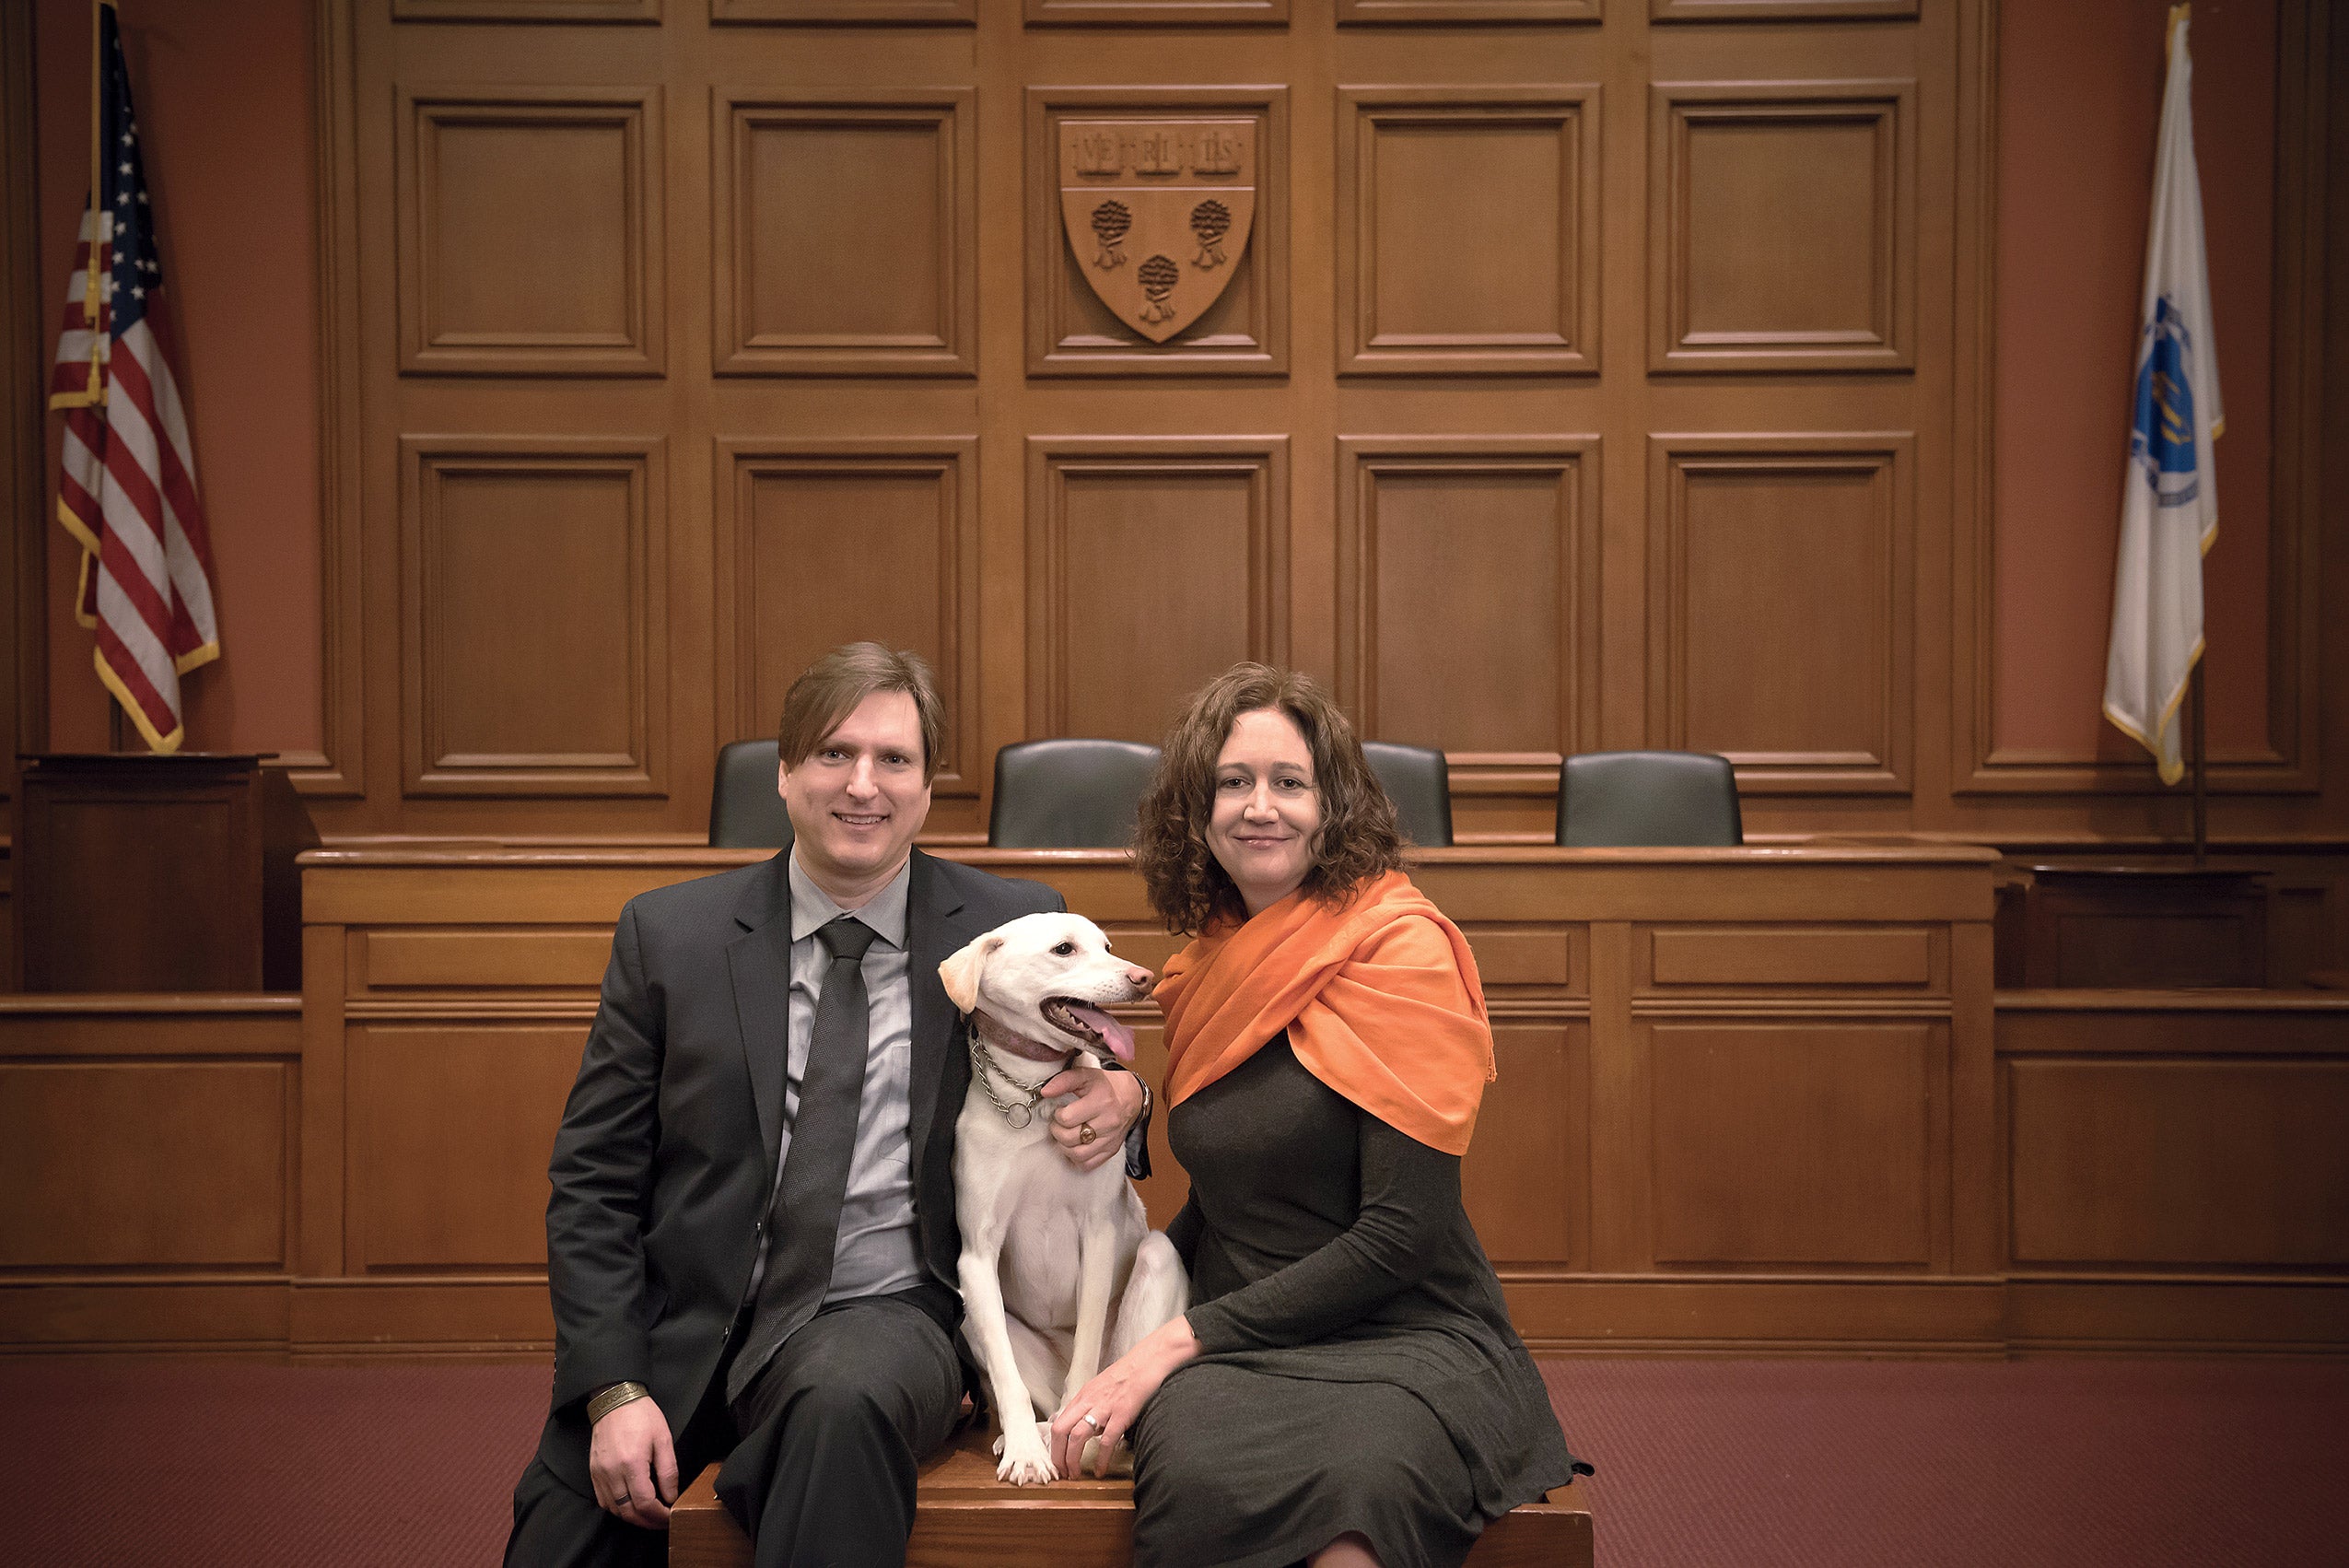 Chris Green and Kristen Stilt in courtroom with a white retriever dog